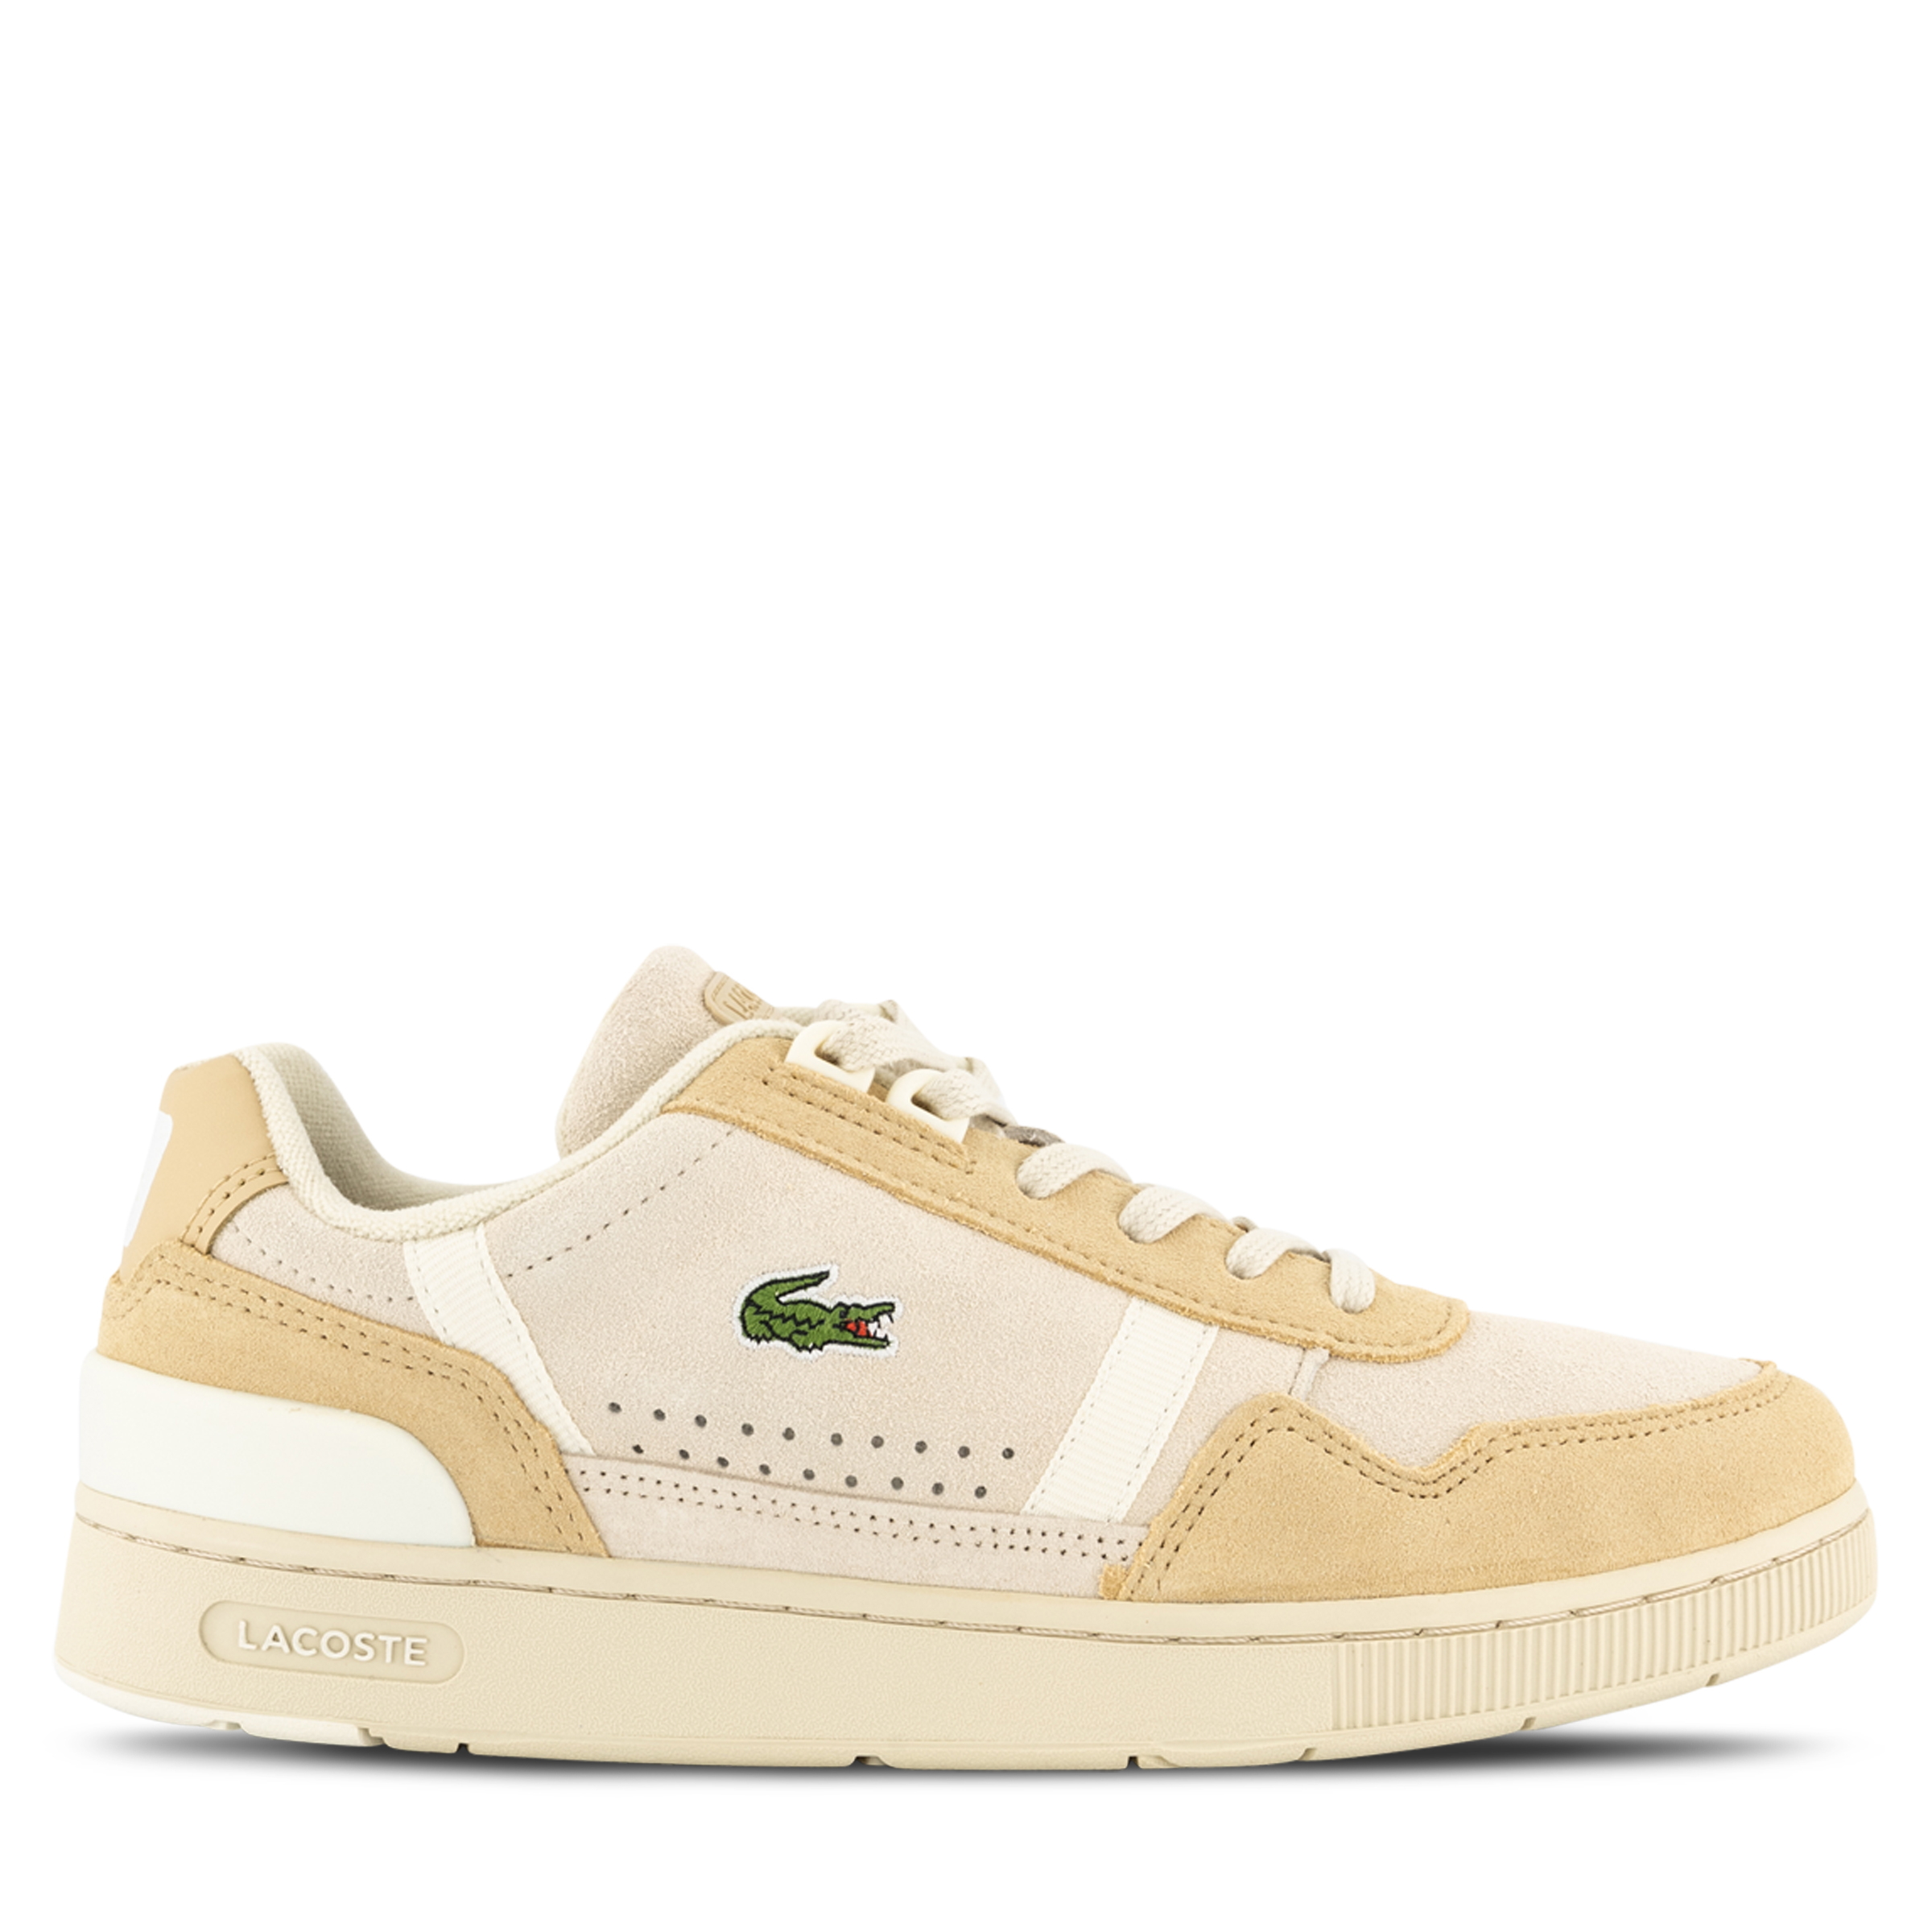 lacoste sneakers and prices